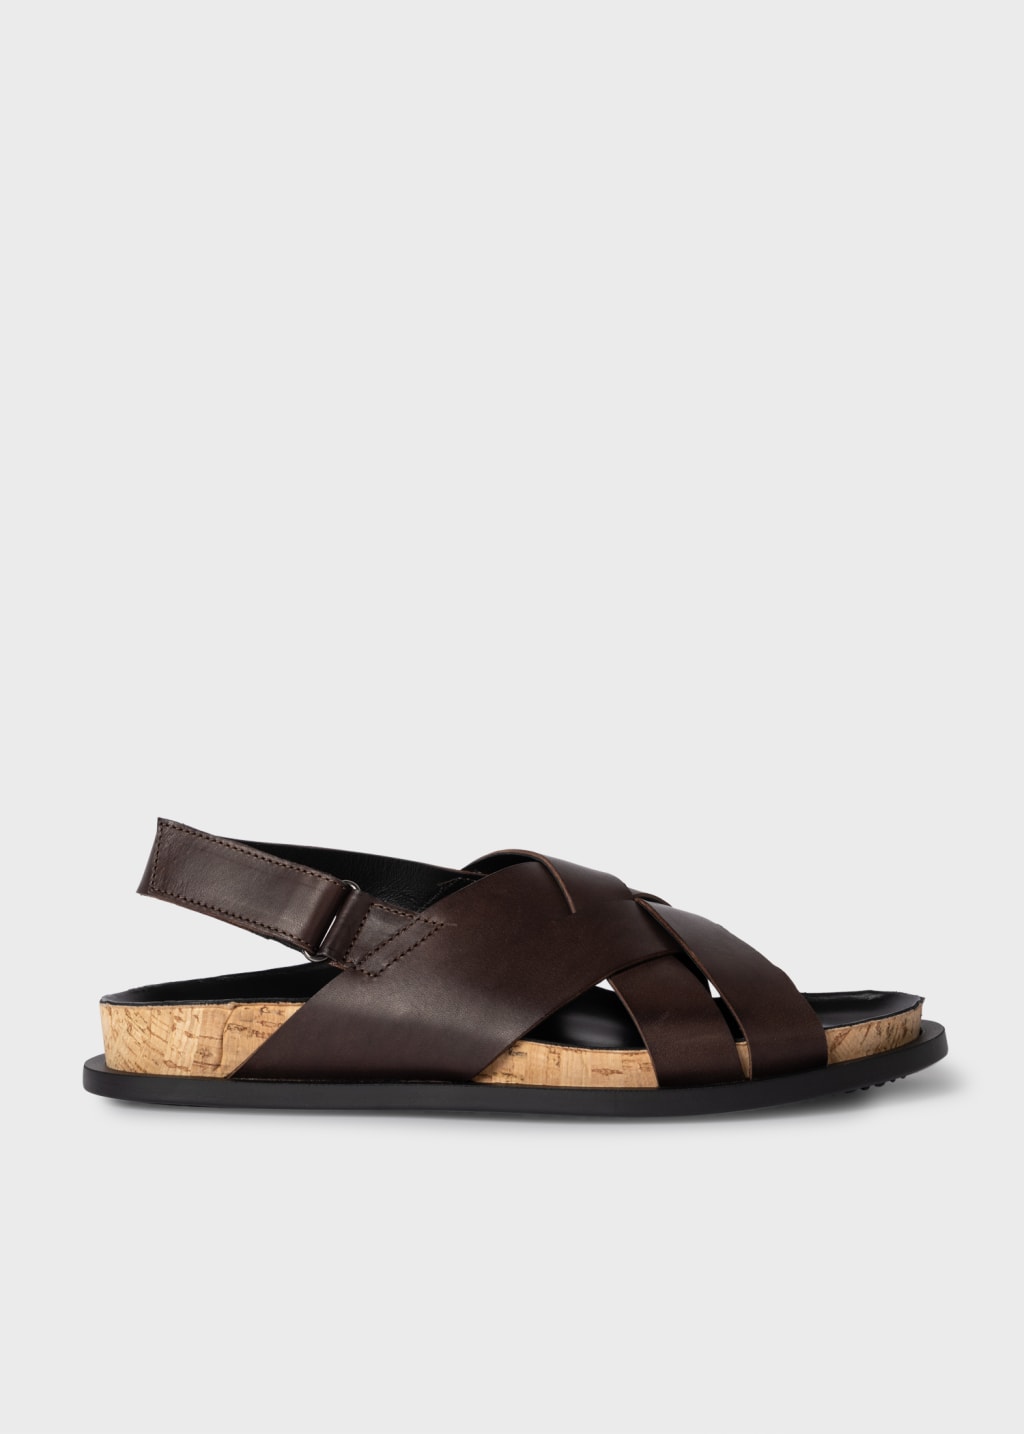 Product view - Dark Brown Leather 'Paros' Sandals Paul Smith